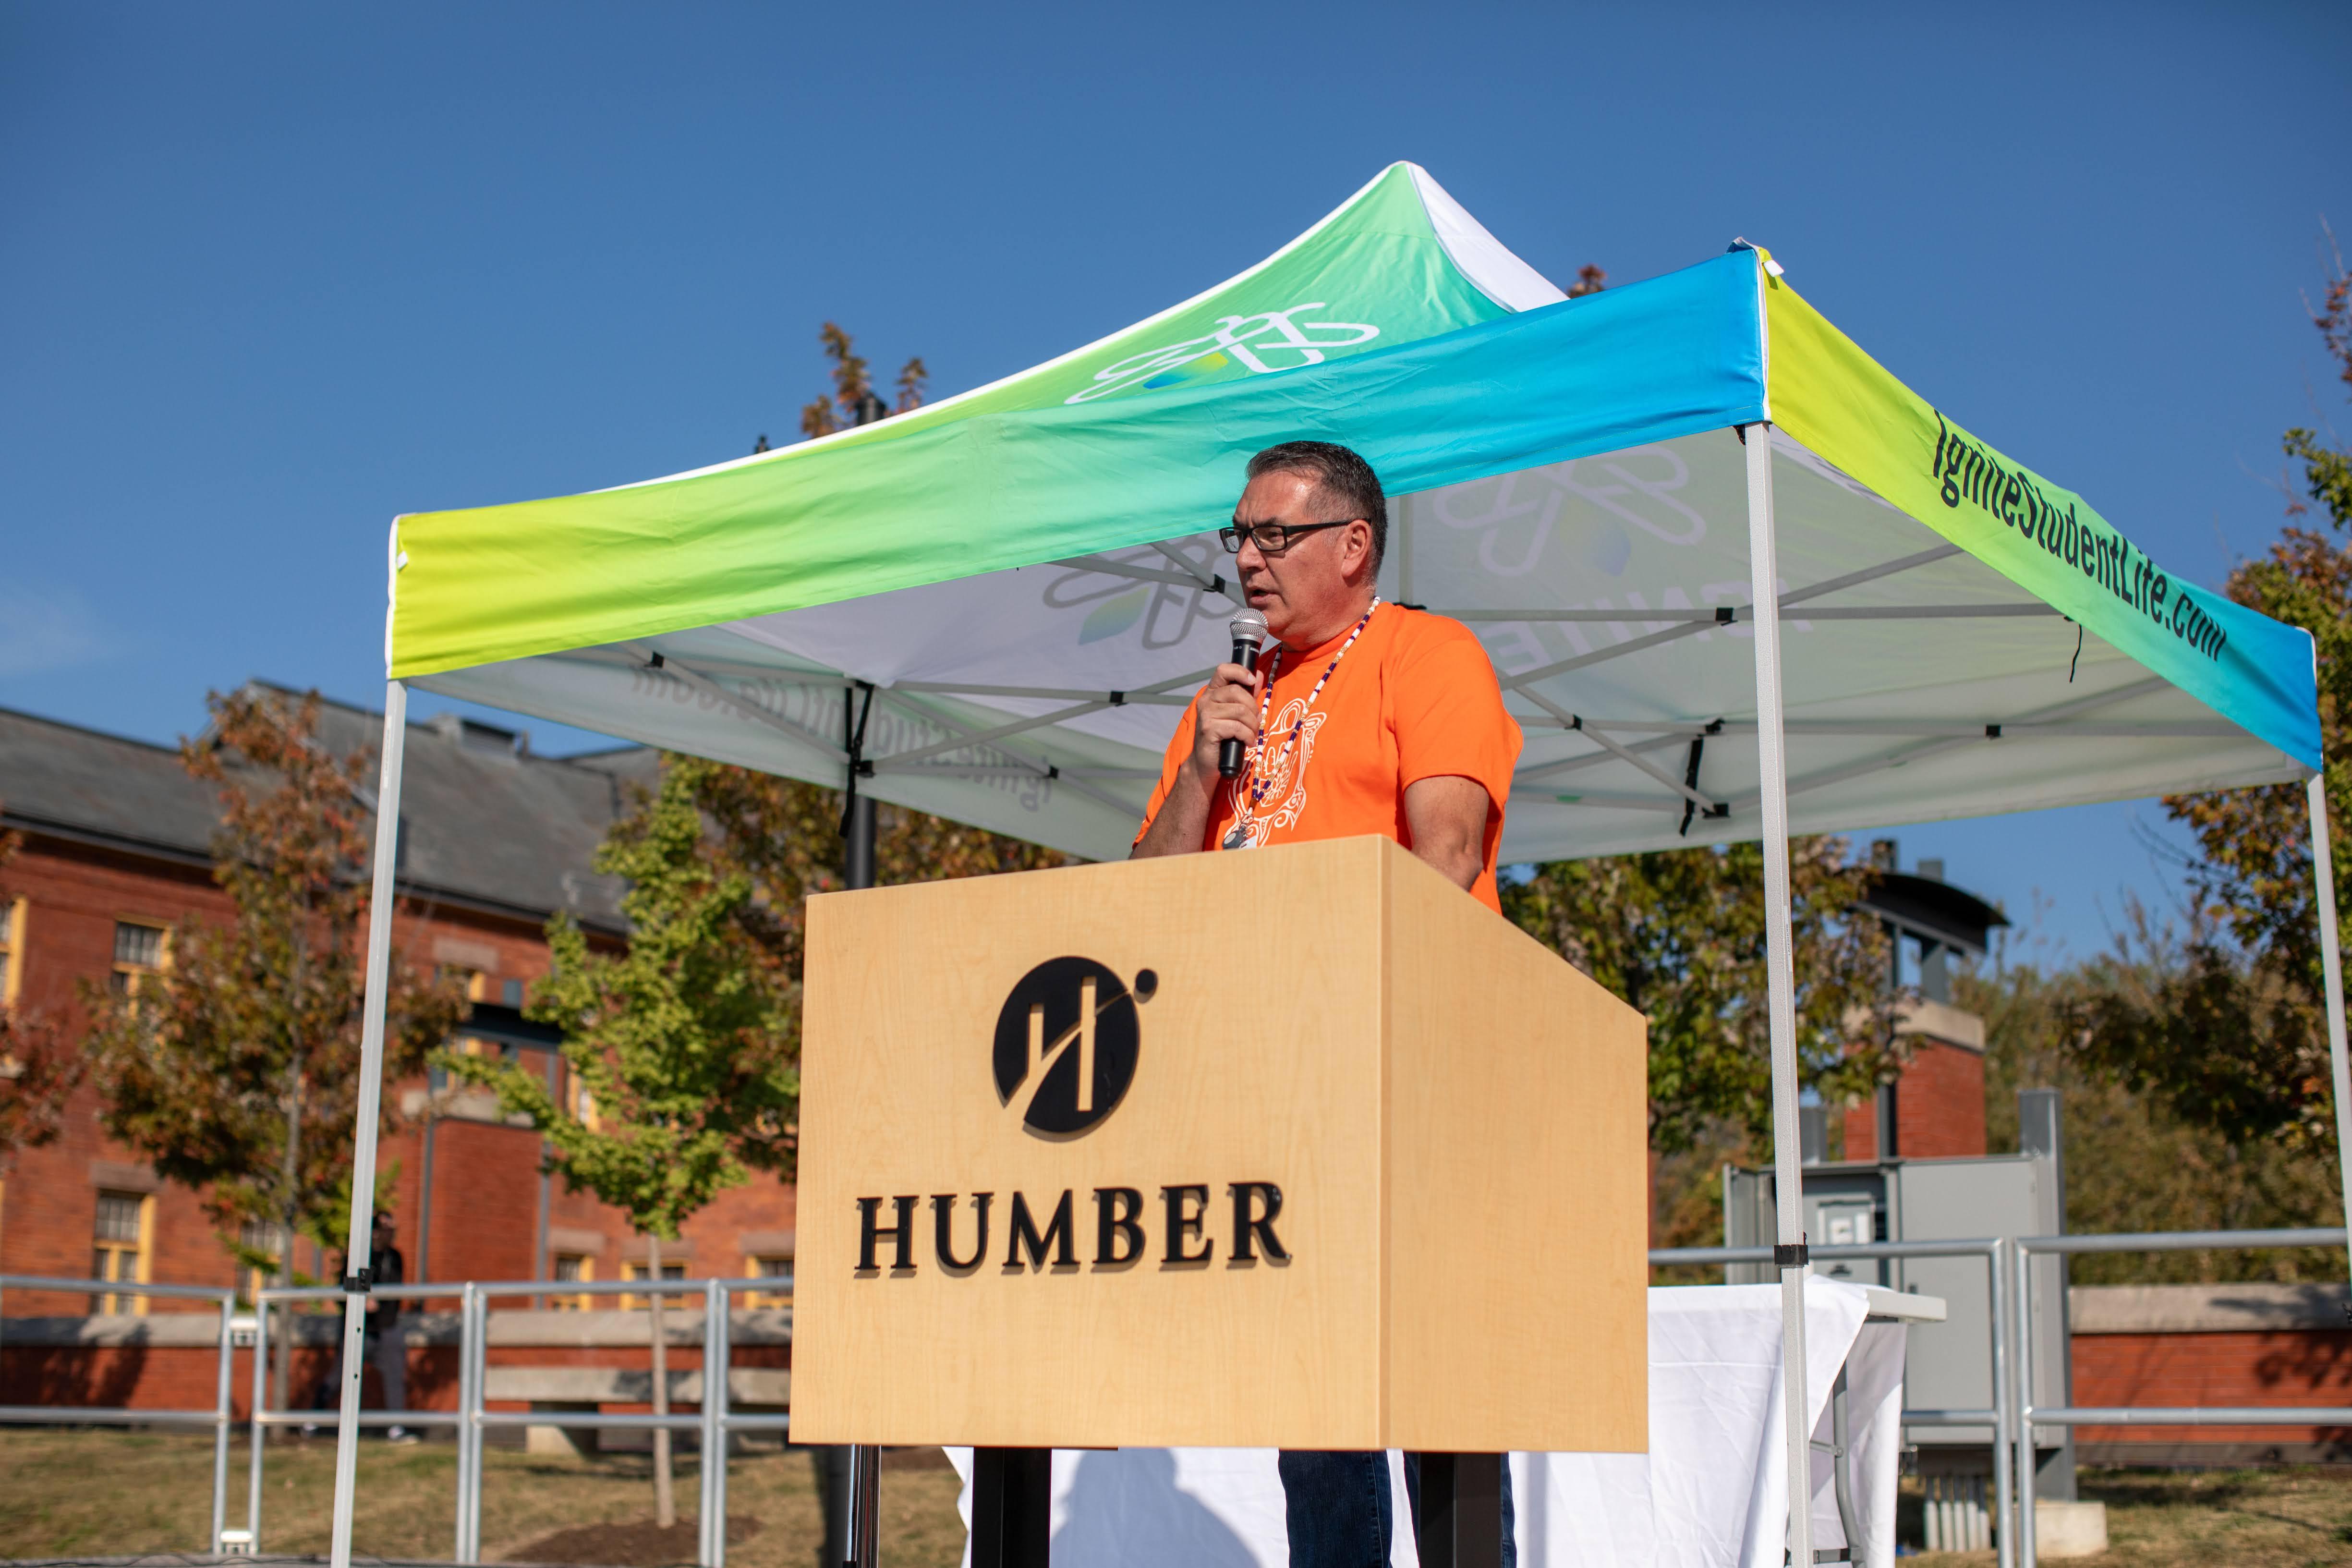 A person wearing an orange shirt speaks into a microphone while standing at a podium with Humber on it.